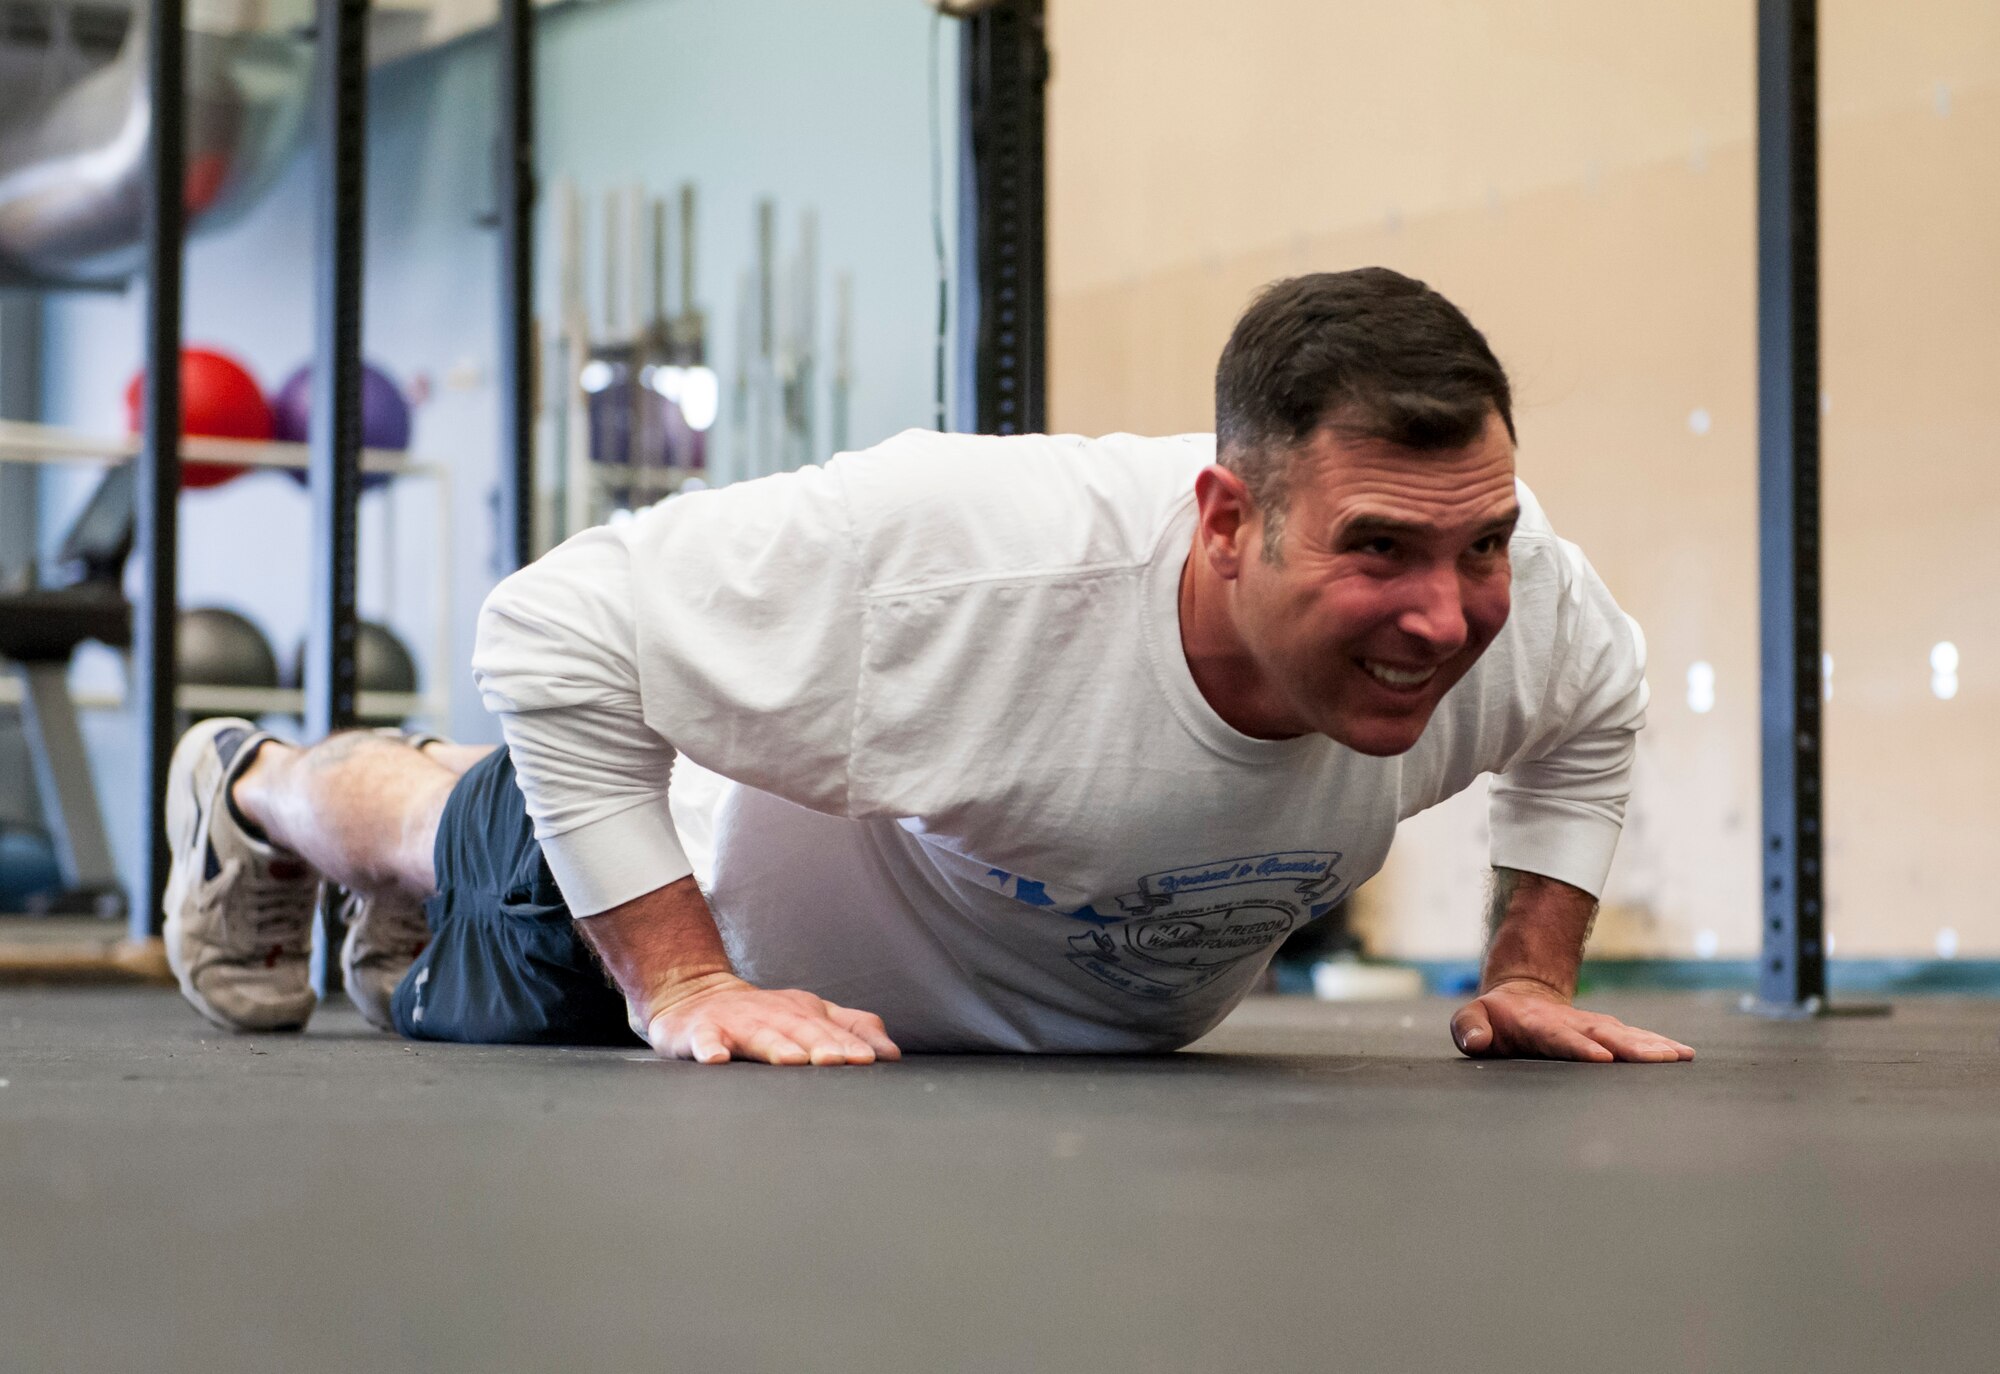 Master Sgt. Christopher Dangelo, 490th Missile Squadron NCO in charge of operations, performs a push-up during a “Wing One” fitness class April 29, 2019, at Malmstrom Air Force Base, Mont.